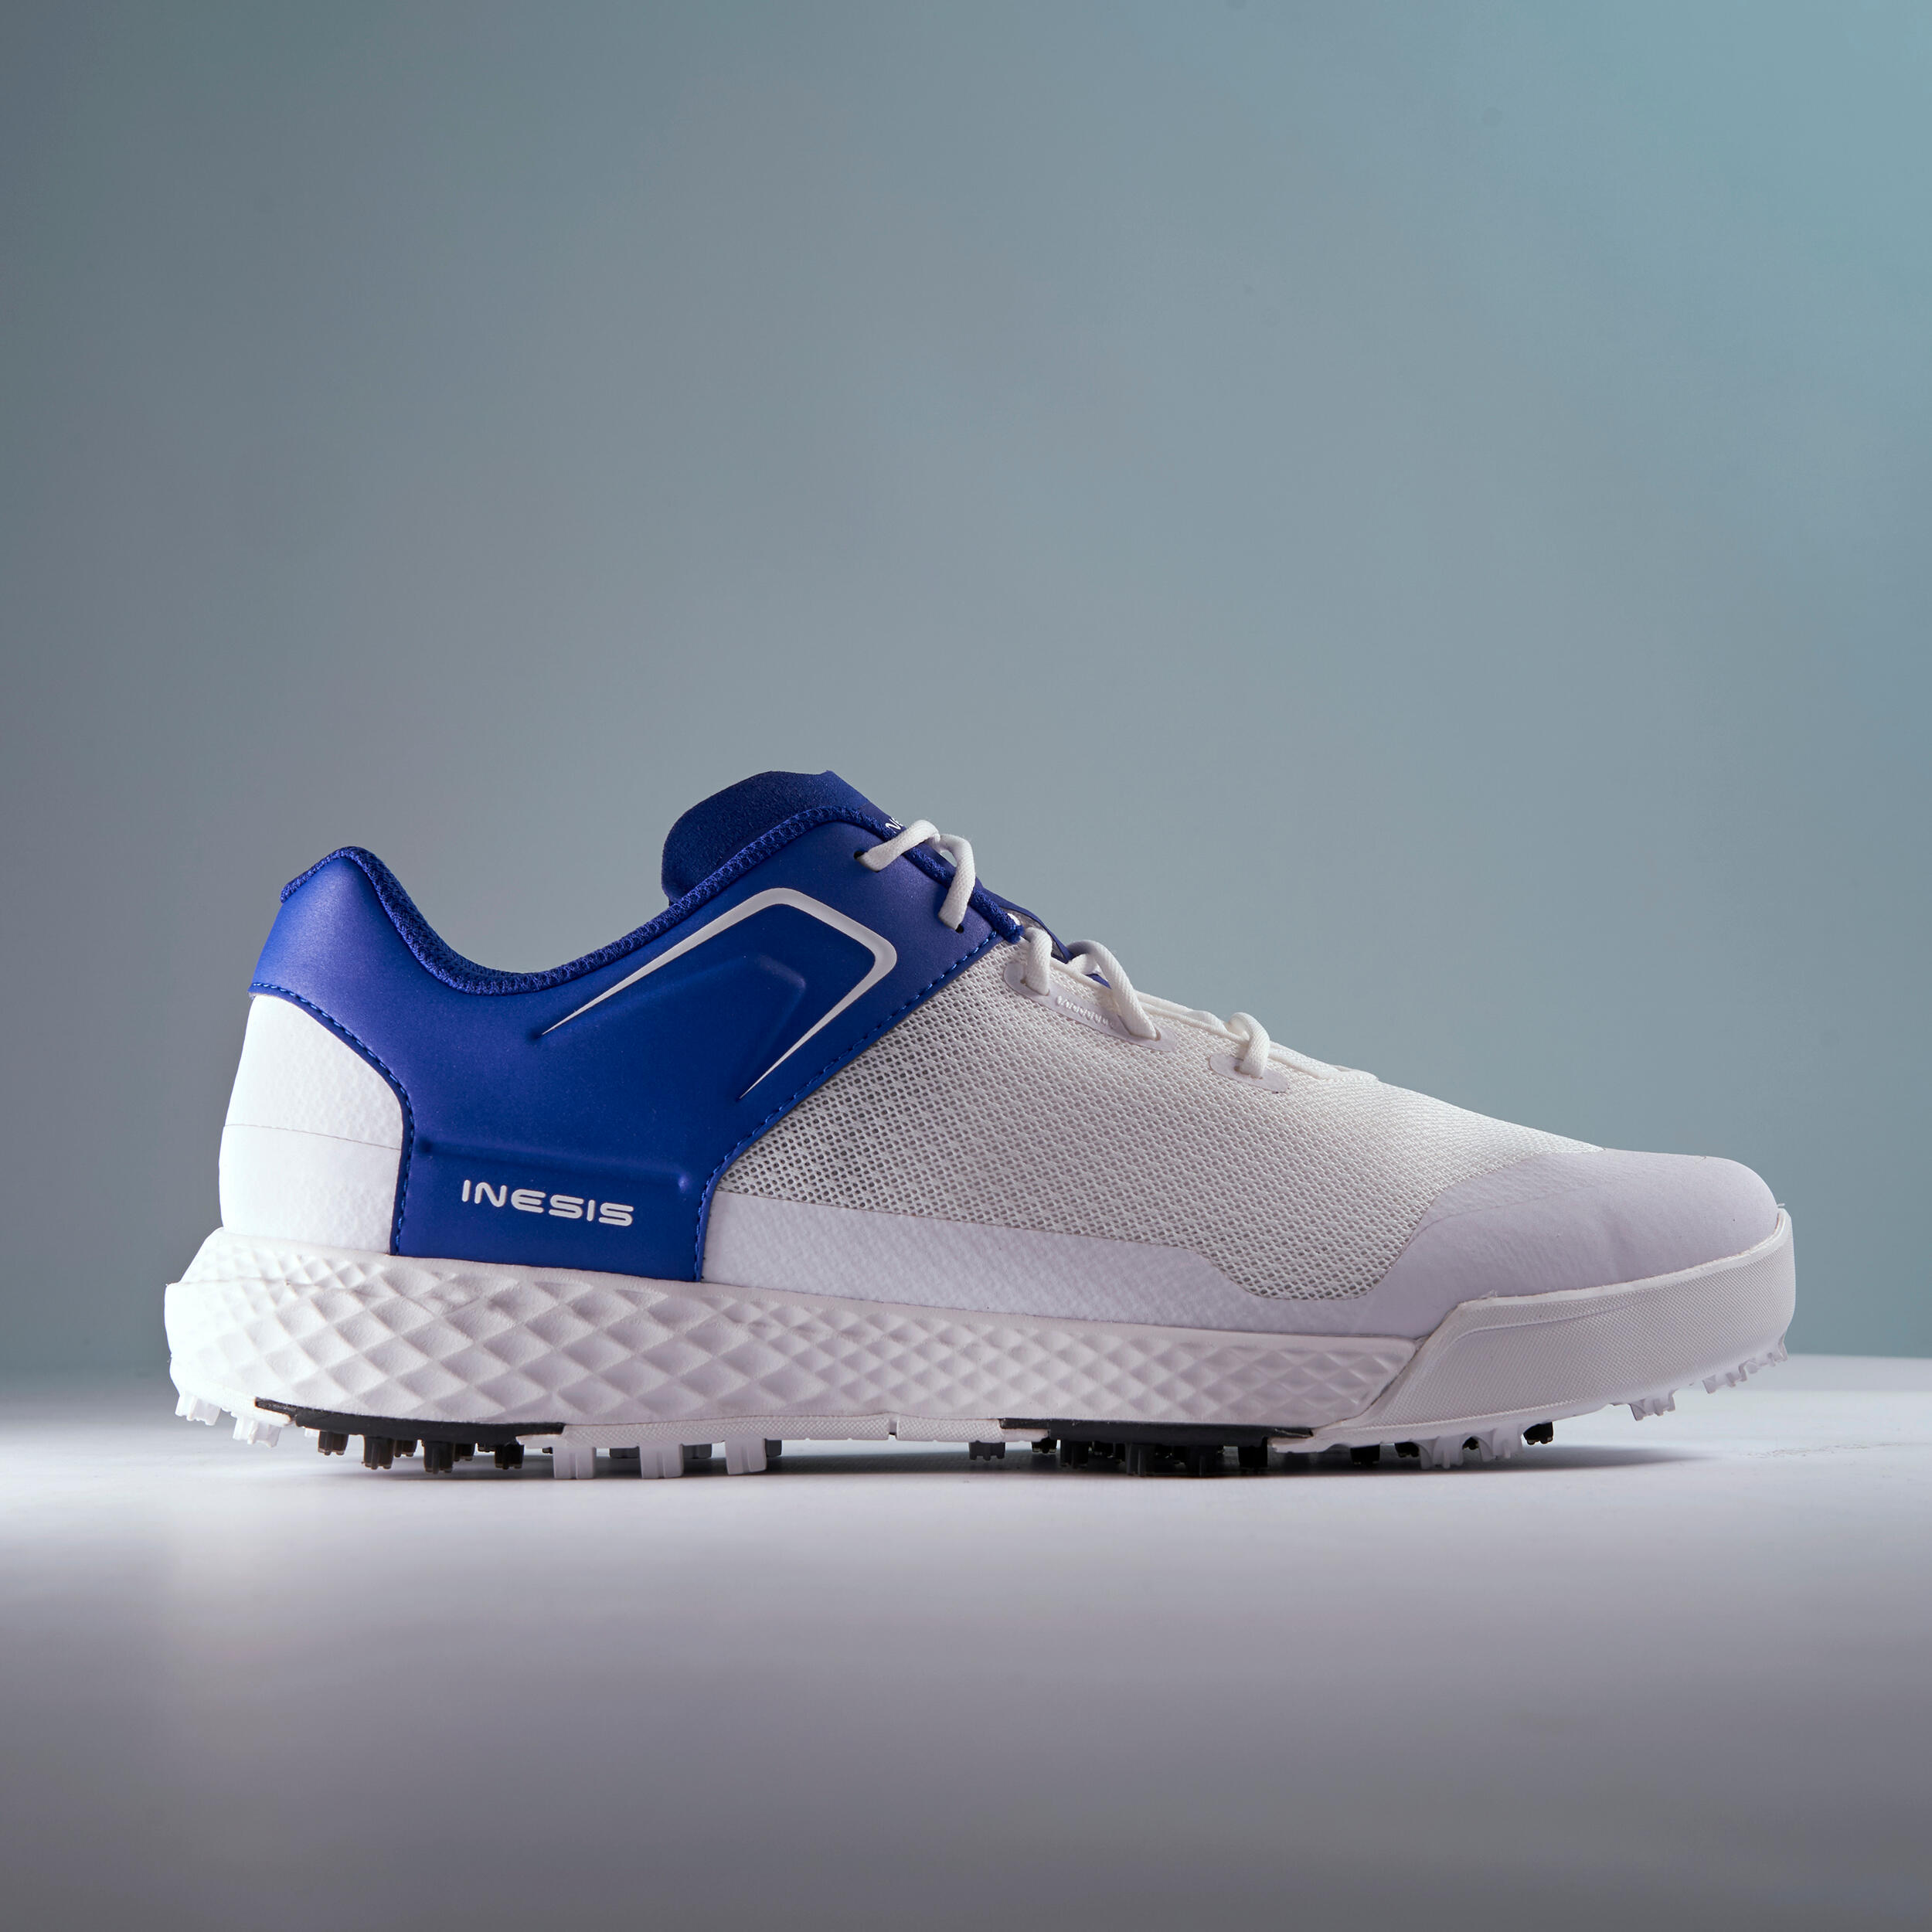 MEN’S GRIP SUMMER GOLF SHOES WHITE AND BLUE 5/13